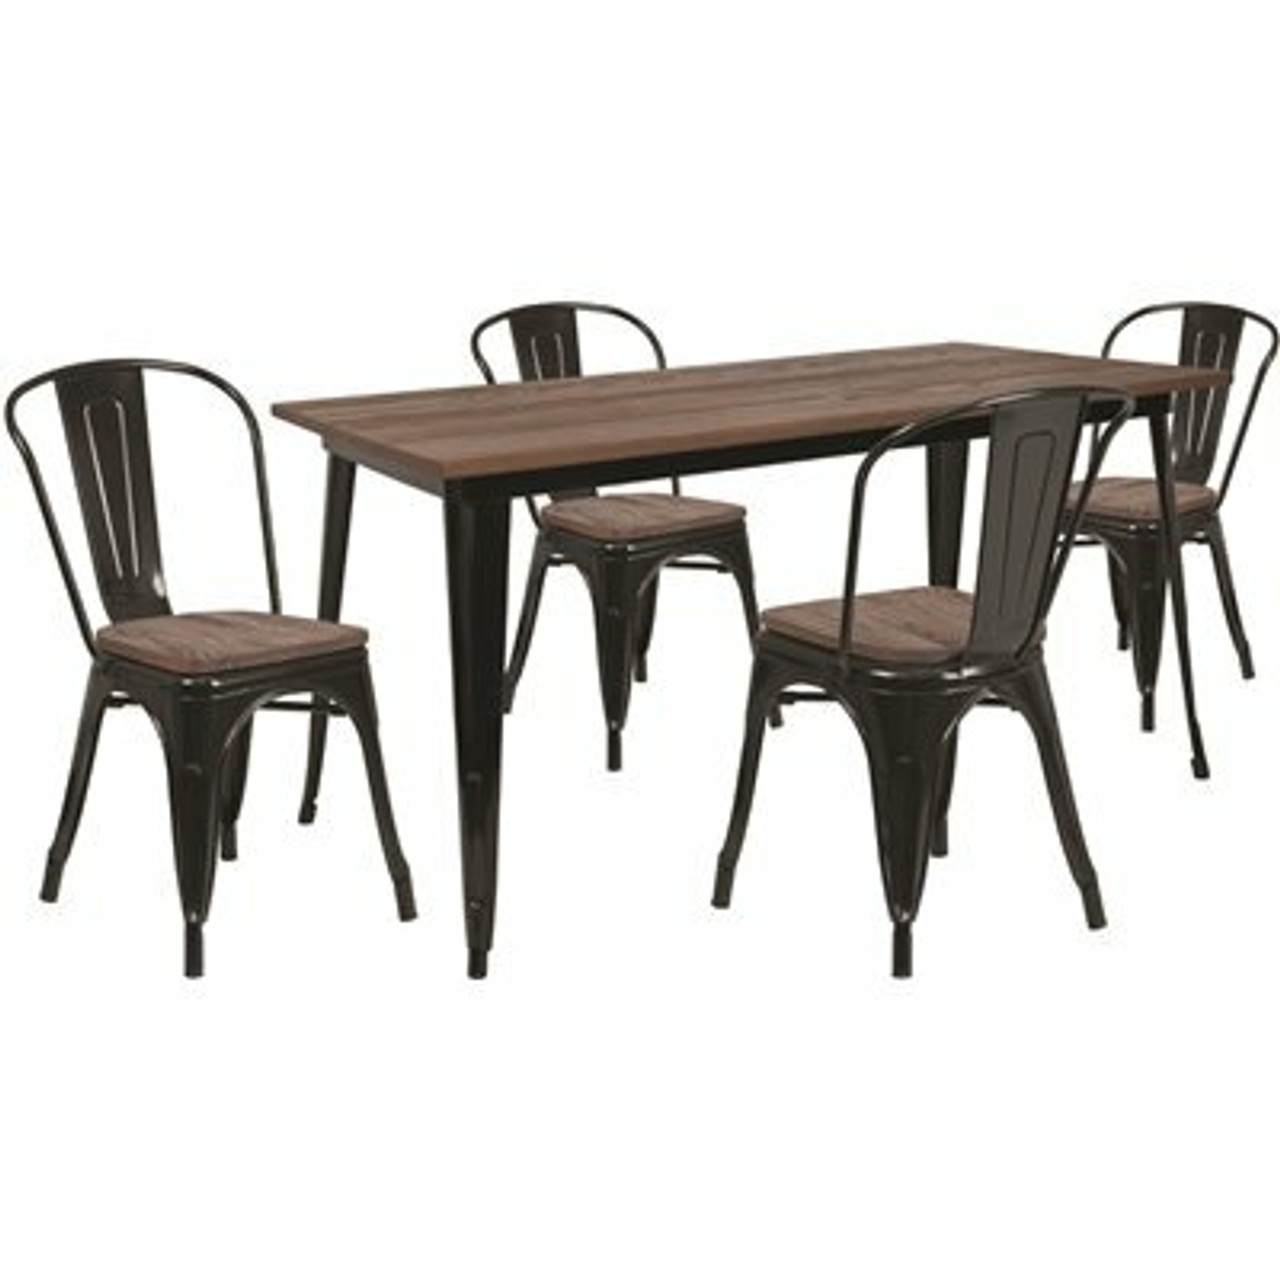 Carnegy Avenue 5-Piece Black Table And Chair Set - 309982834